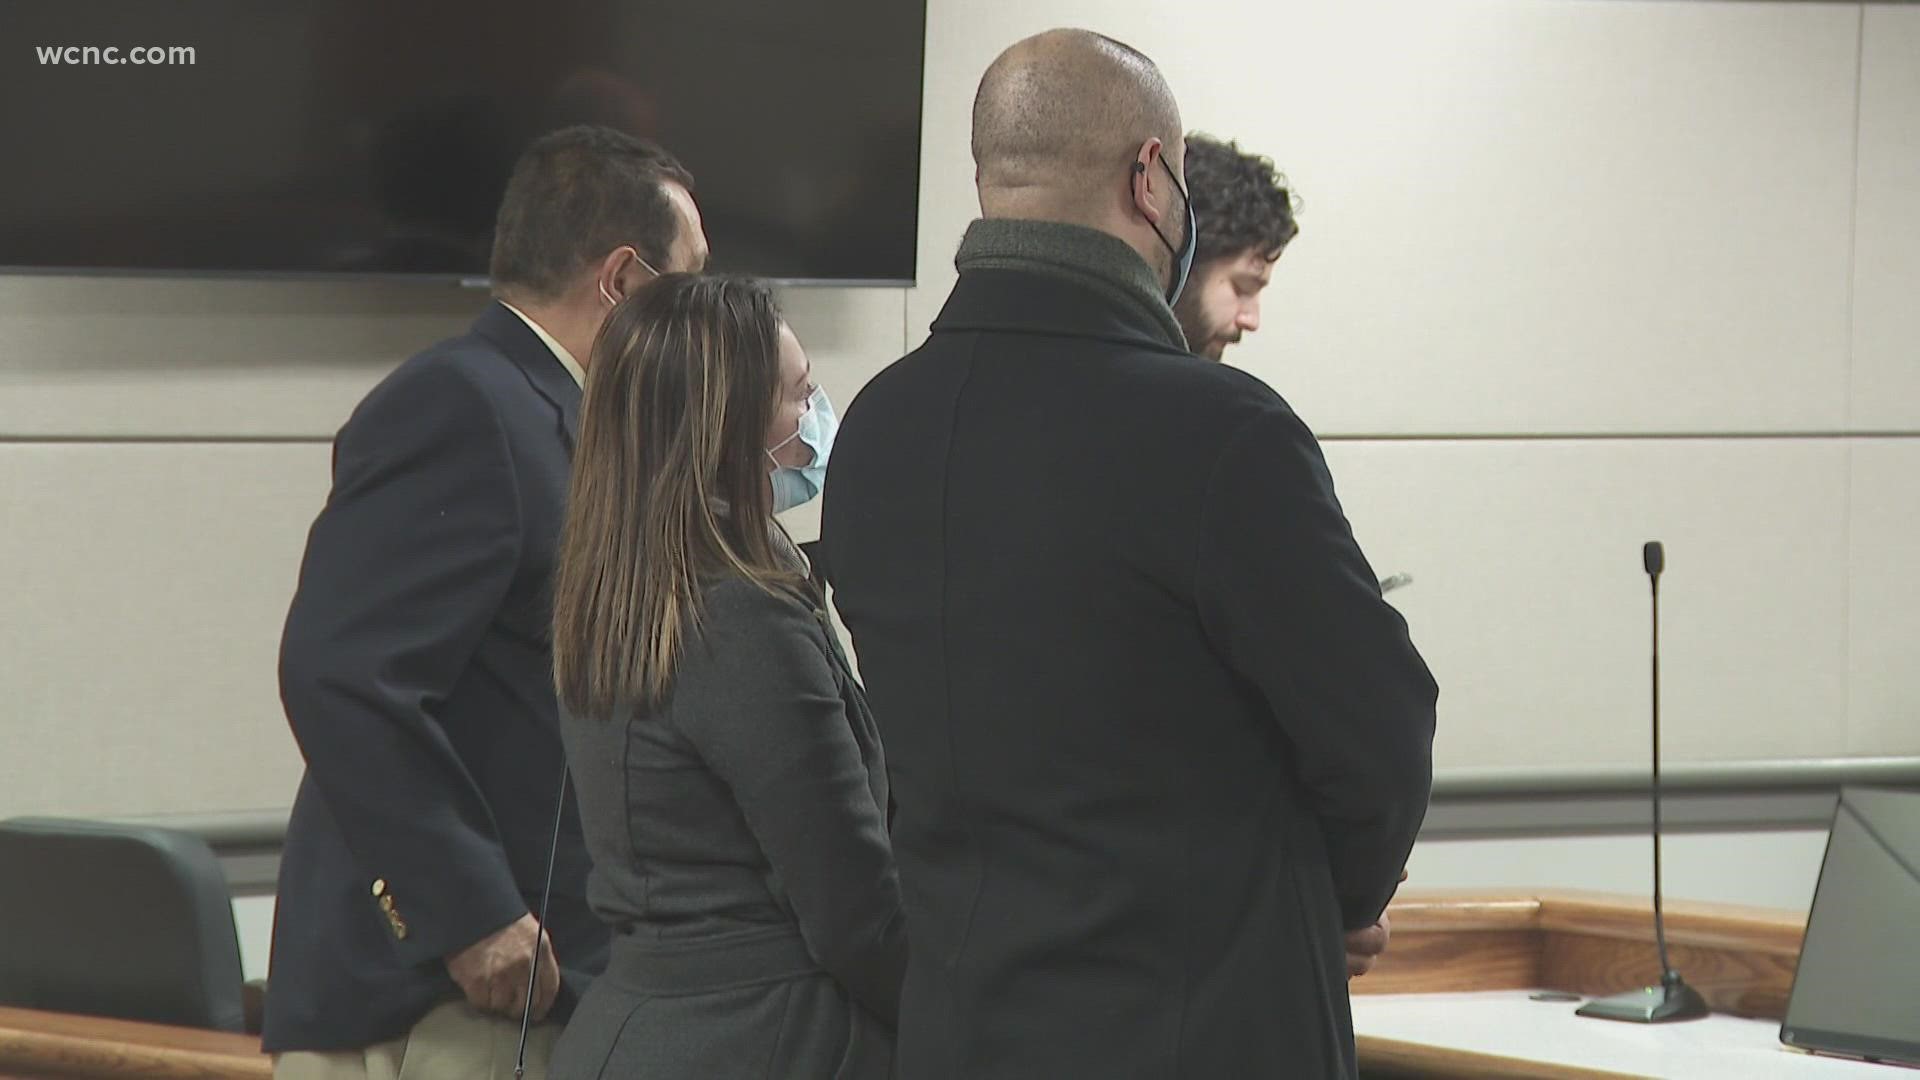 After two long days of testimony against former Rock Hill police officer Jonathan Moreno, a jury found him not guilty of assaulting a young man during an arrest.